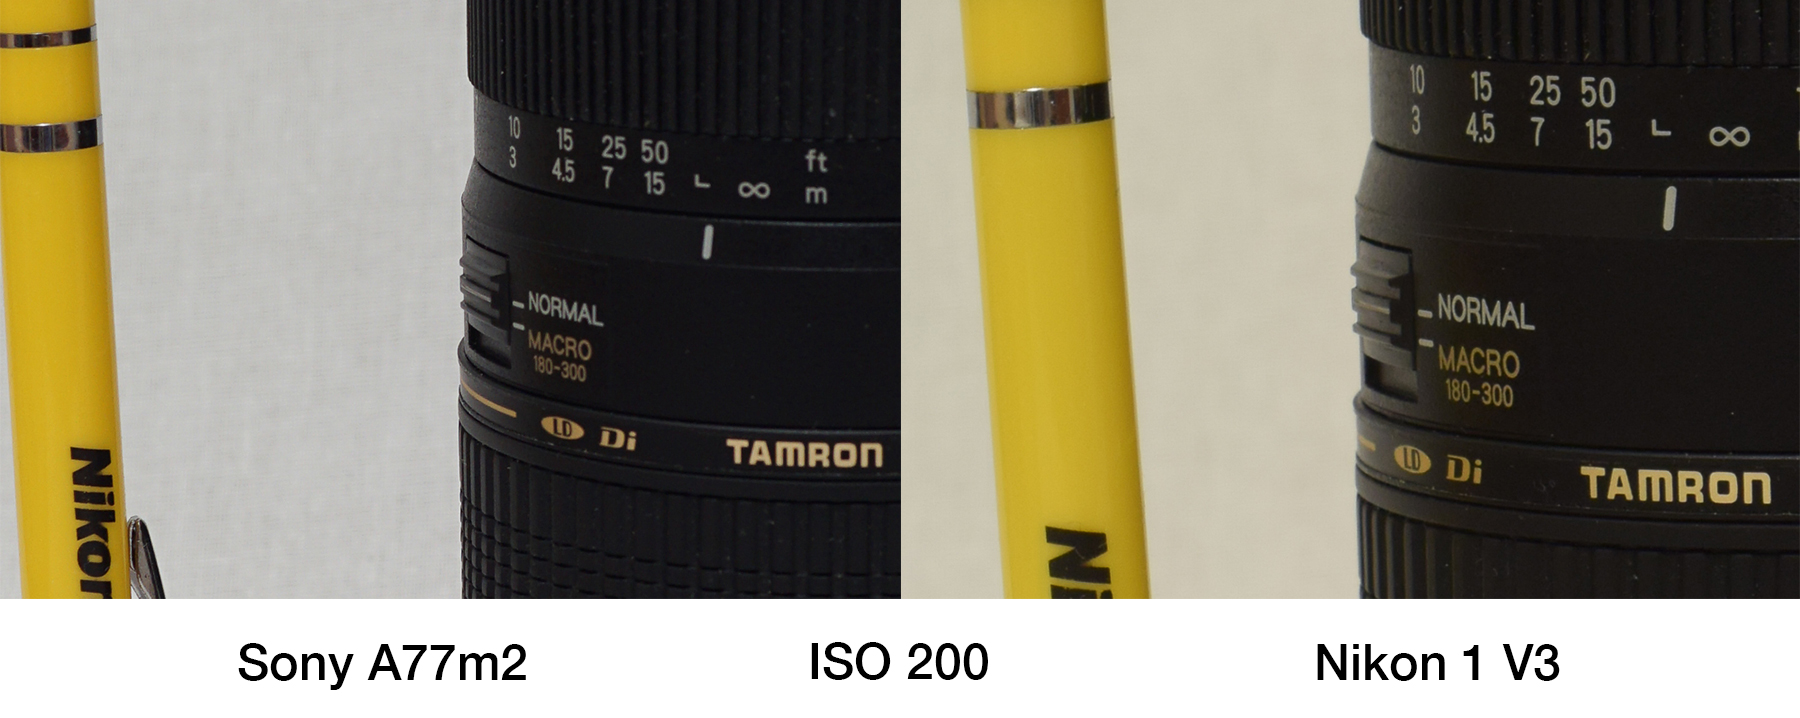 iso200